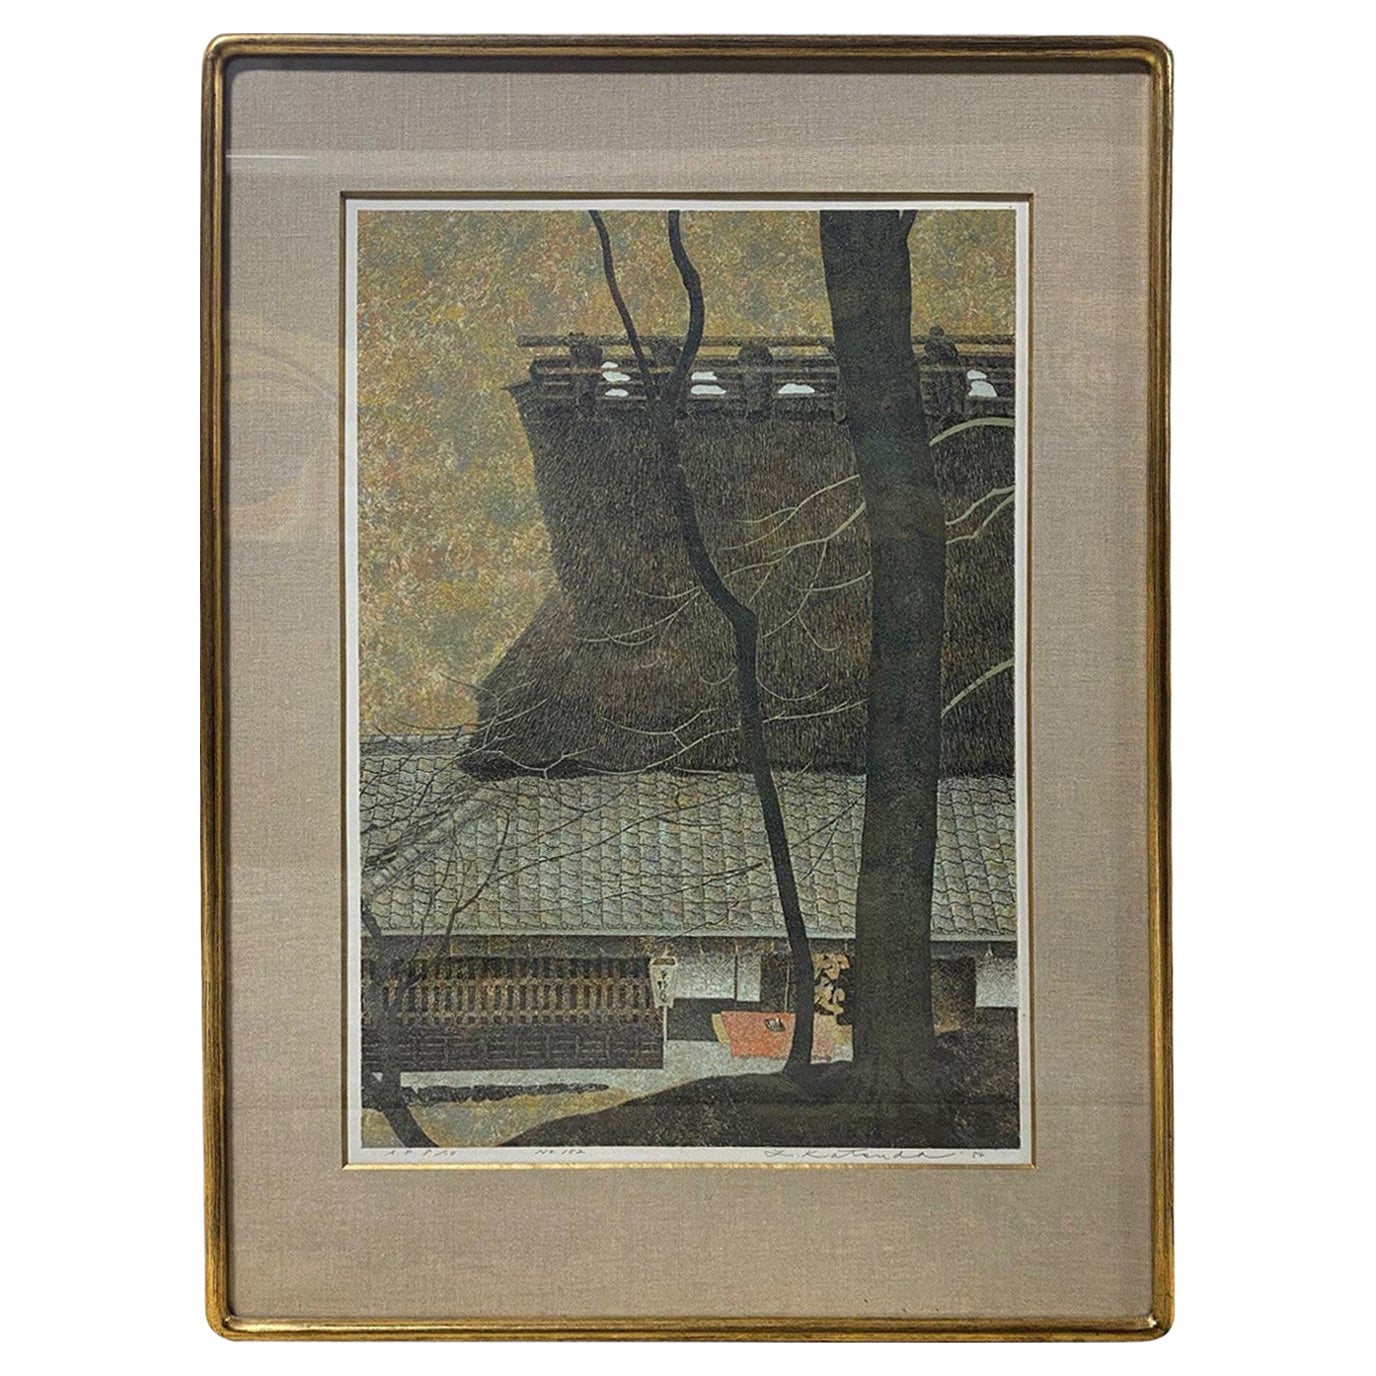 Yukio Katsuda Signed Limited Ed. Japanese Serigraph Print No. 152 Thatched Roof For Sale